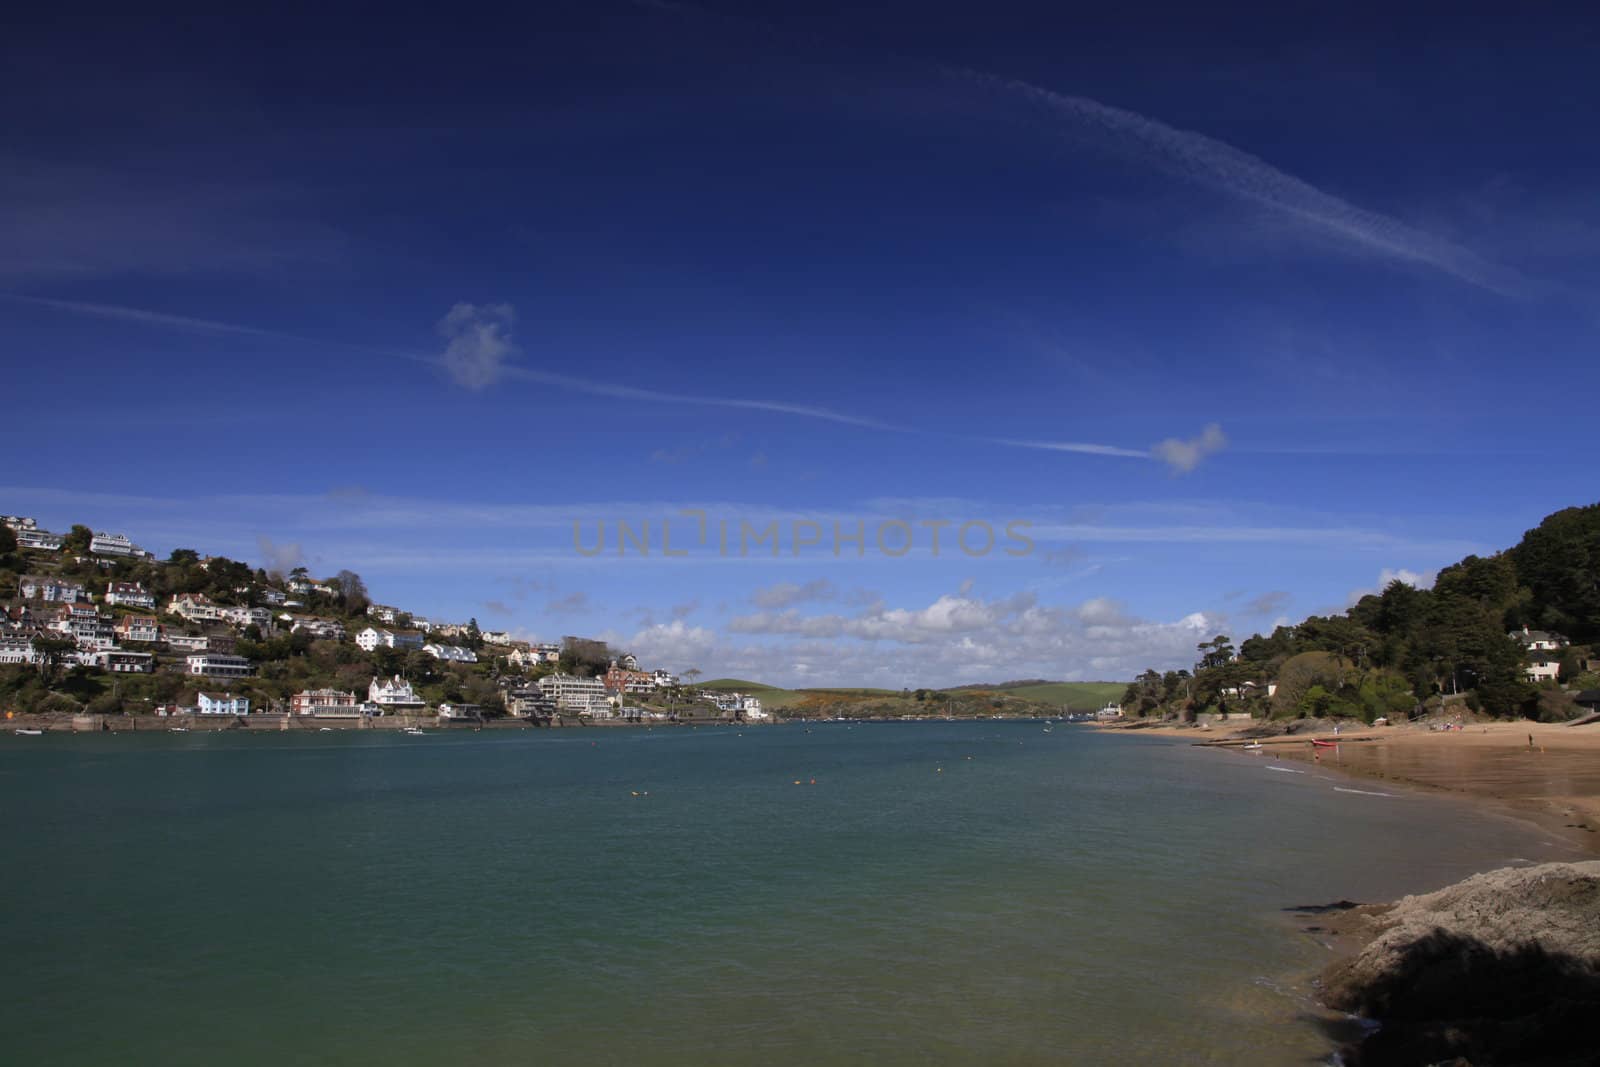 On the shore at Salcombe by olliemt